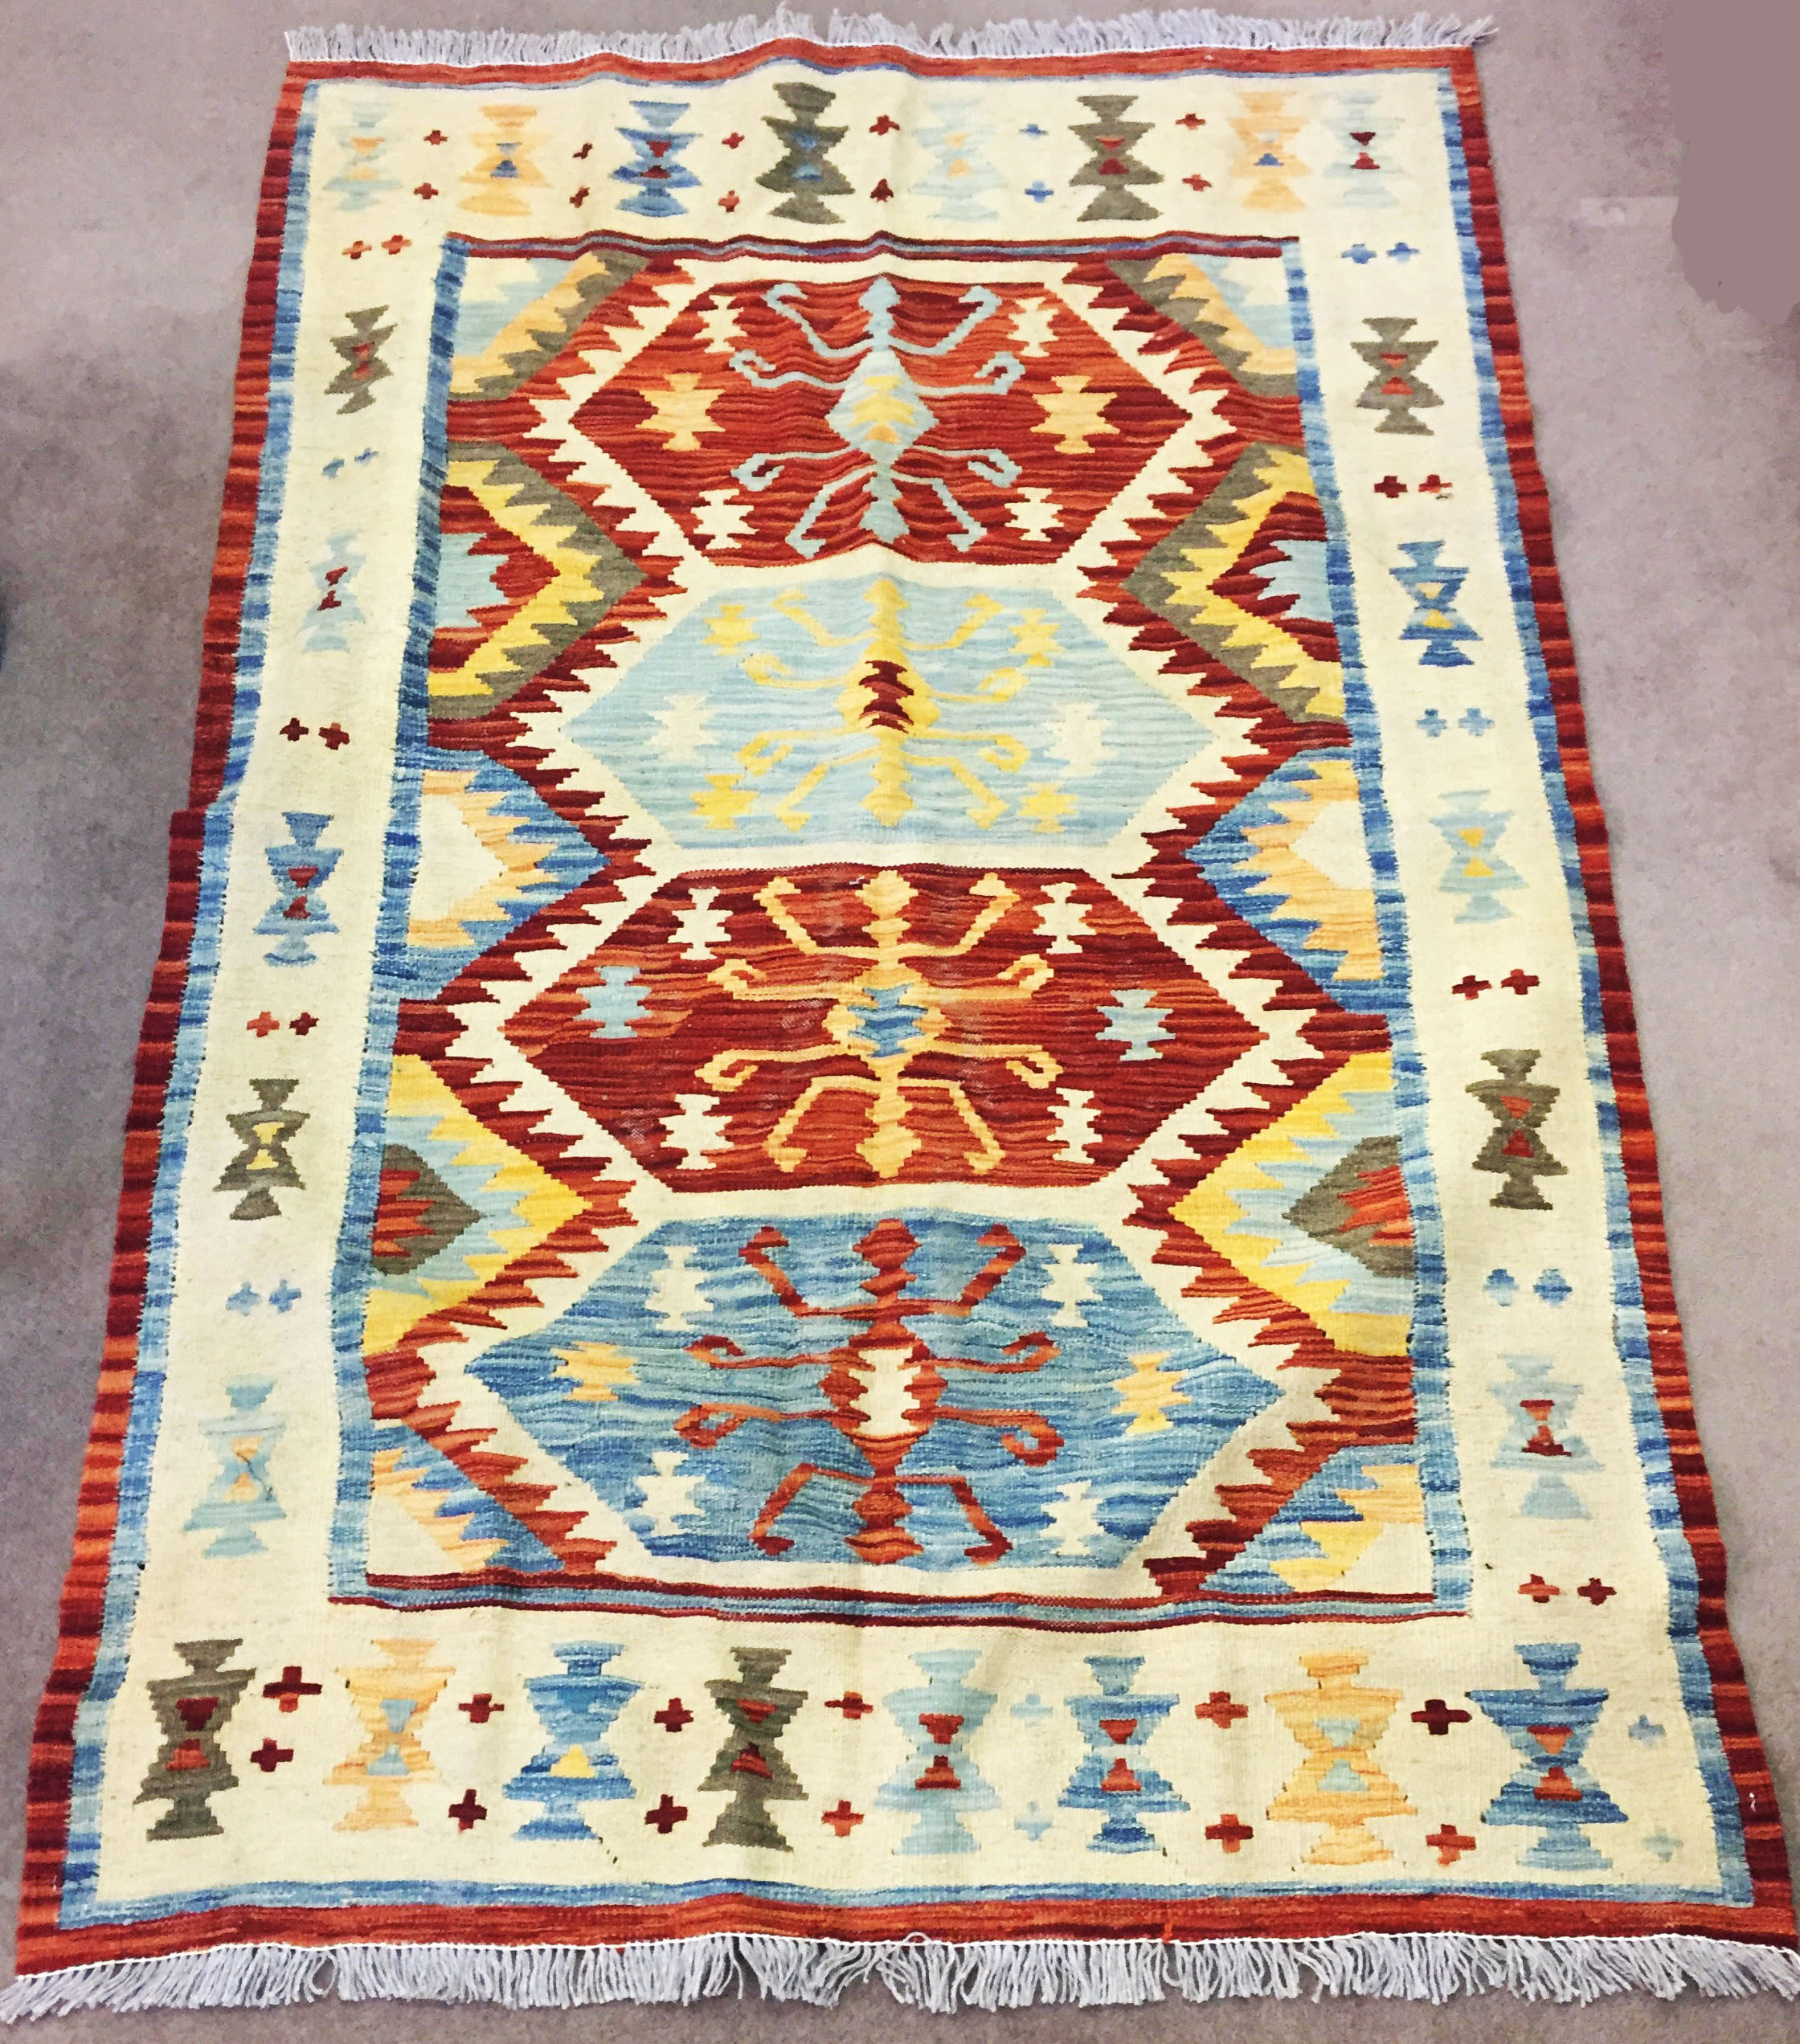 Blue Beige Red Rug 192 X 123 Cm, Cost To Ship A Rug